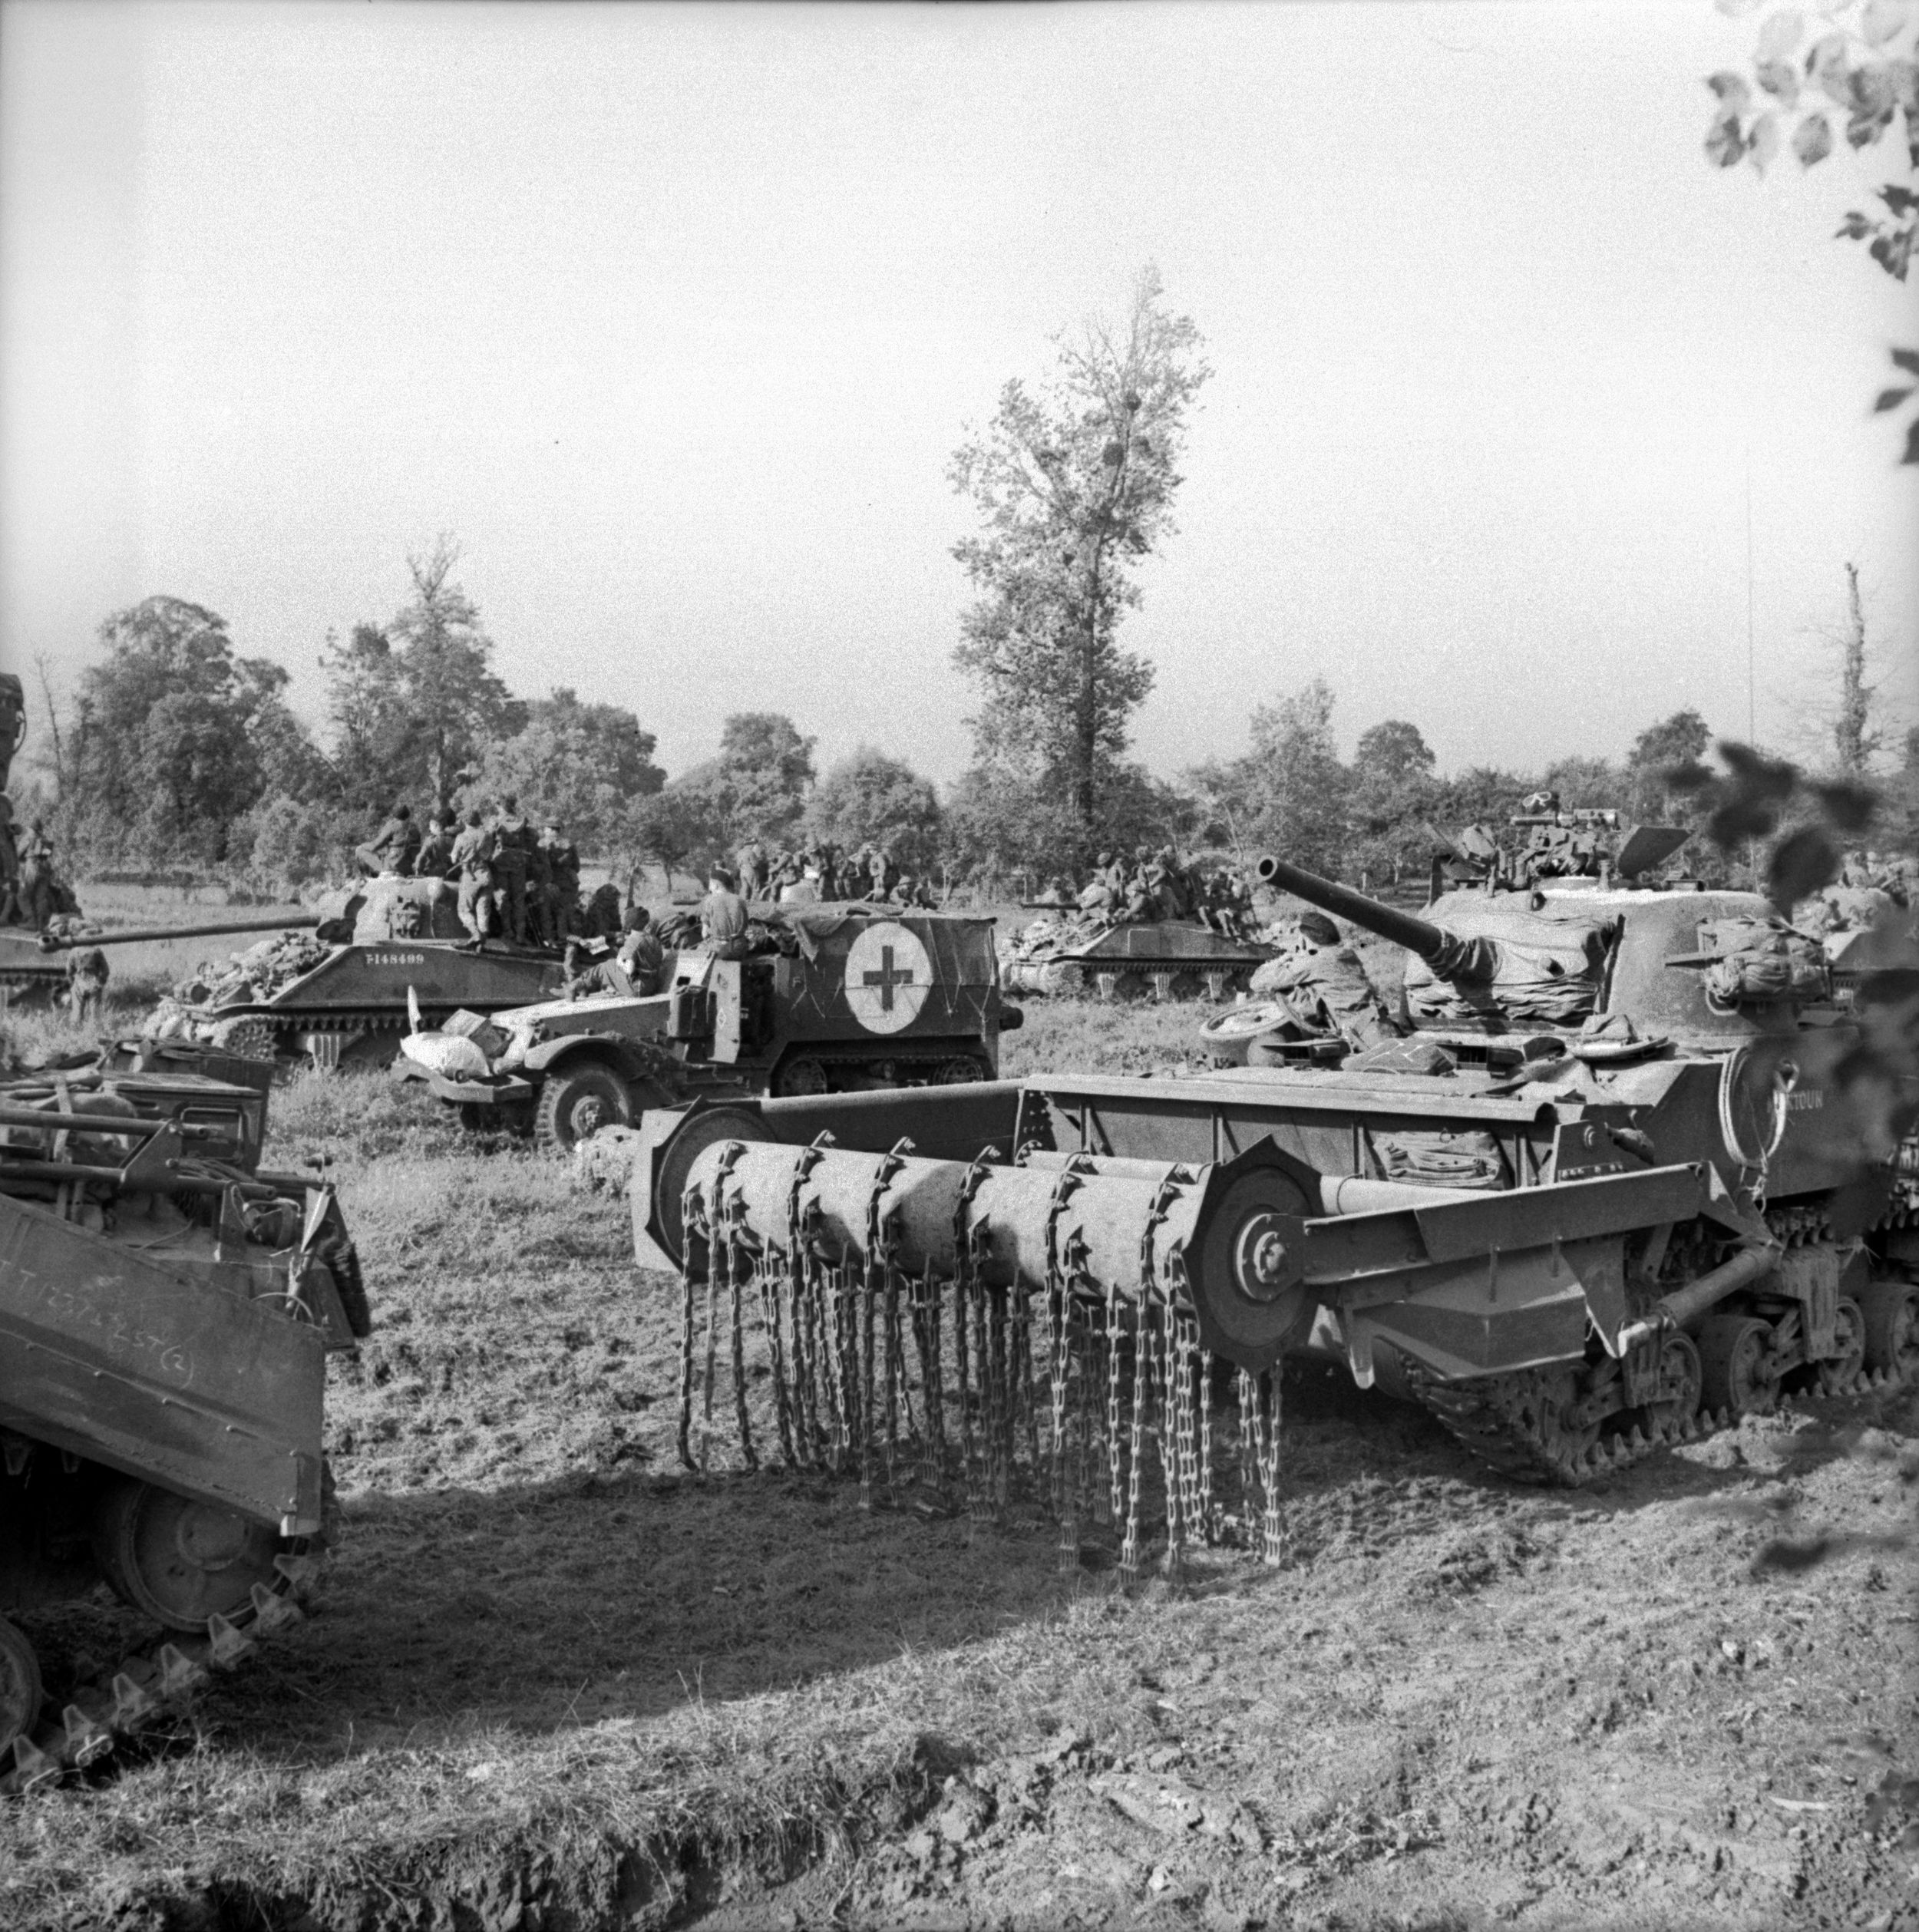 During the opening hours of Operation Goodwood, a Sherman tank carrying infantrymen, a Sherman flail tank nicknamed a “Crab,” and a halftrack serving as an ambulance await orders to advance on July 18, 1944. Caen was a D-Day objective, but the Allies were required to fight for weeks to capture the town.